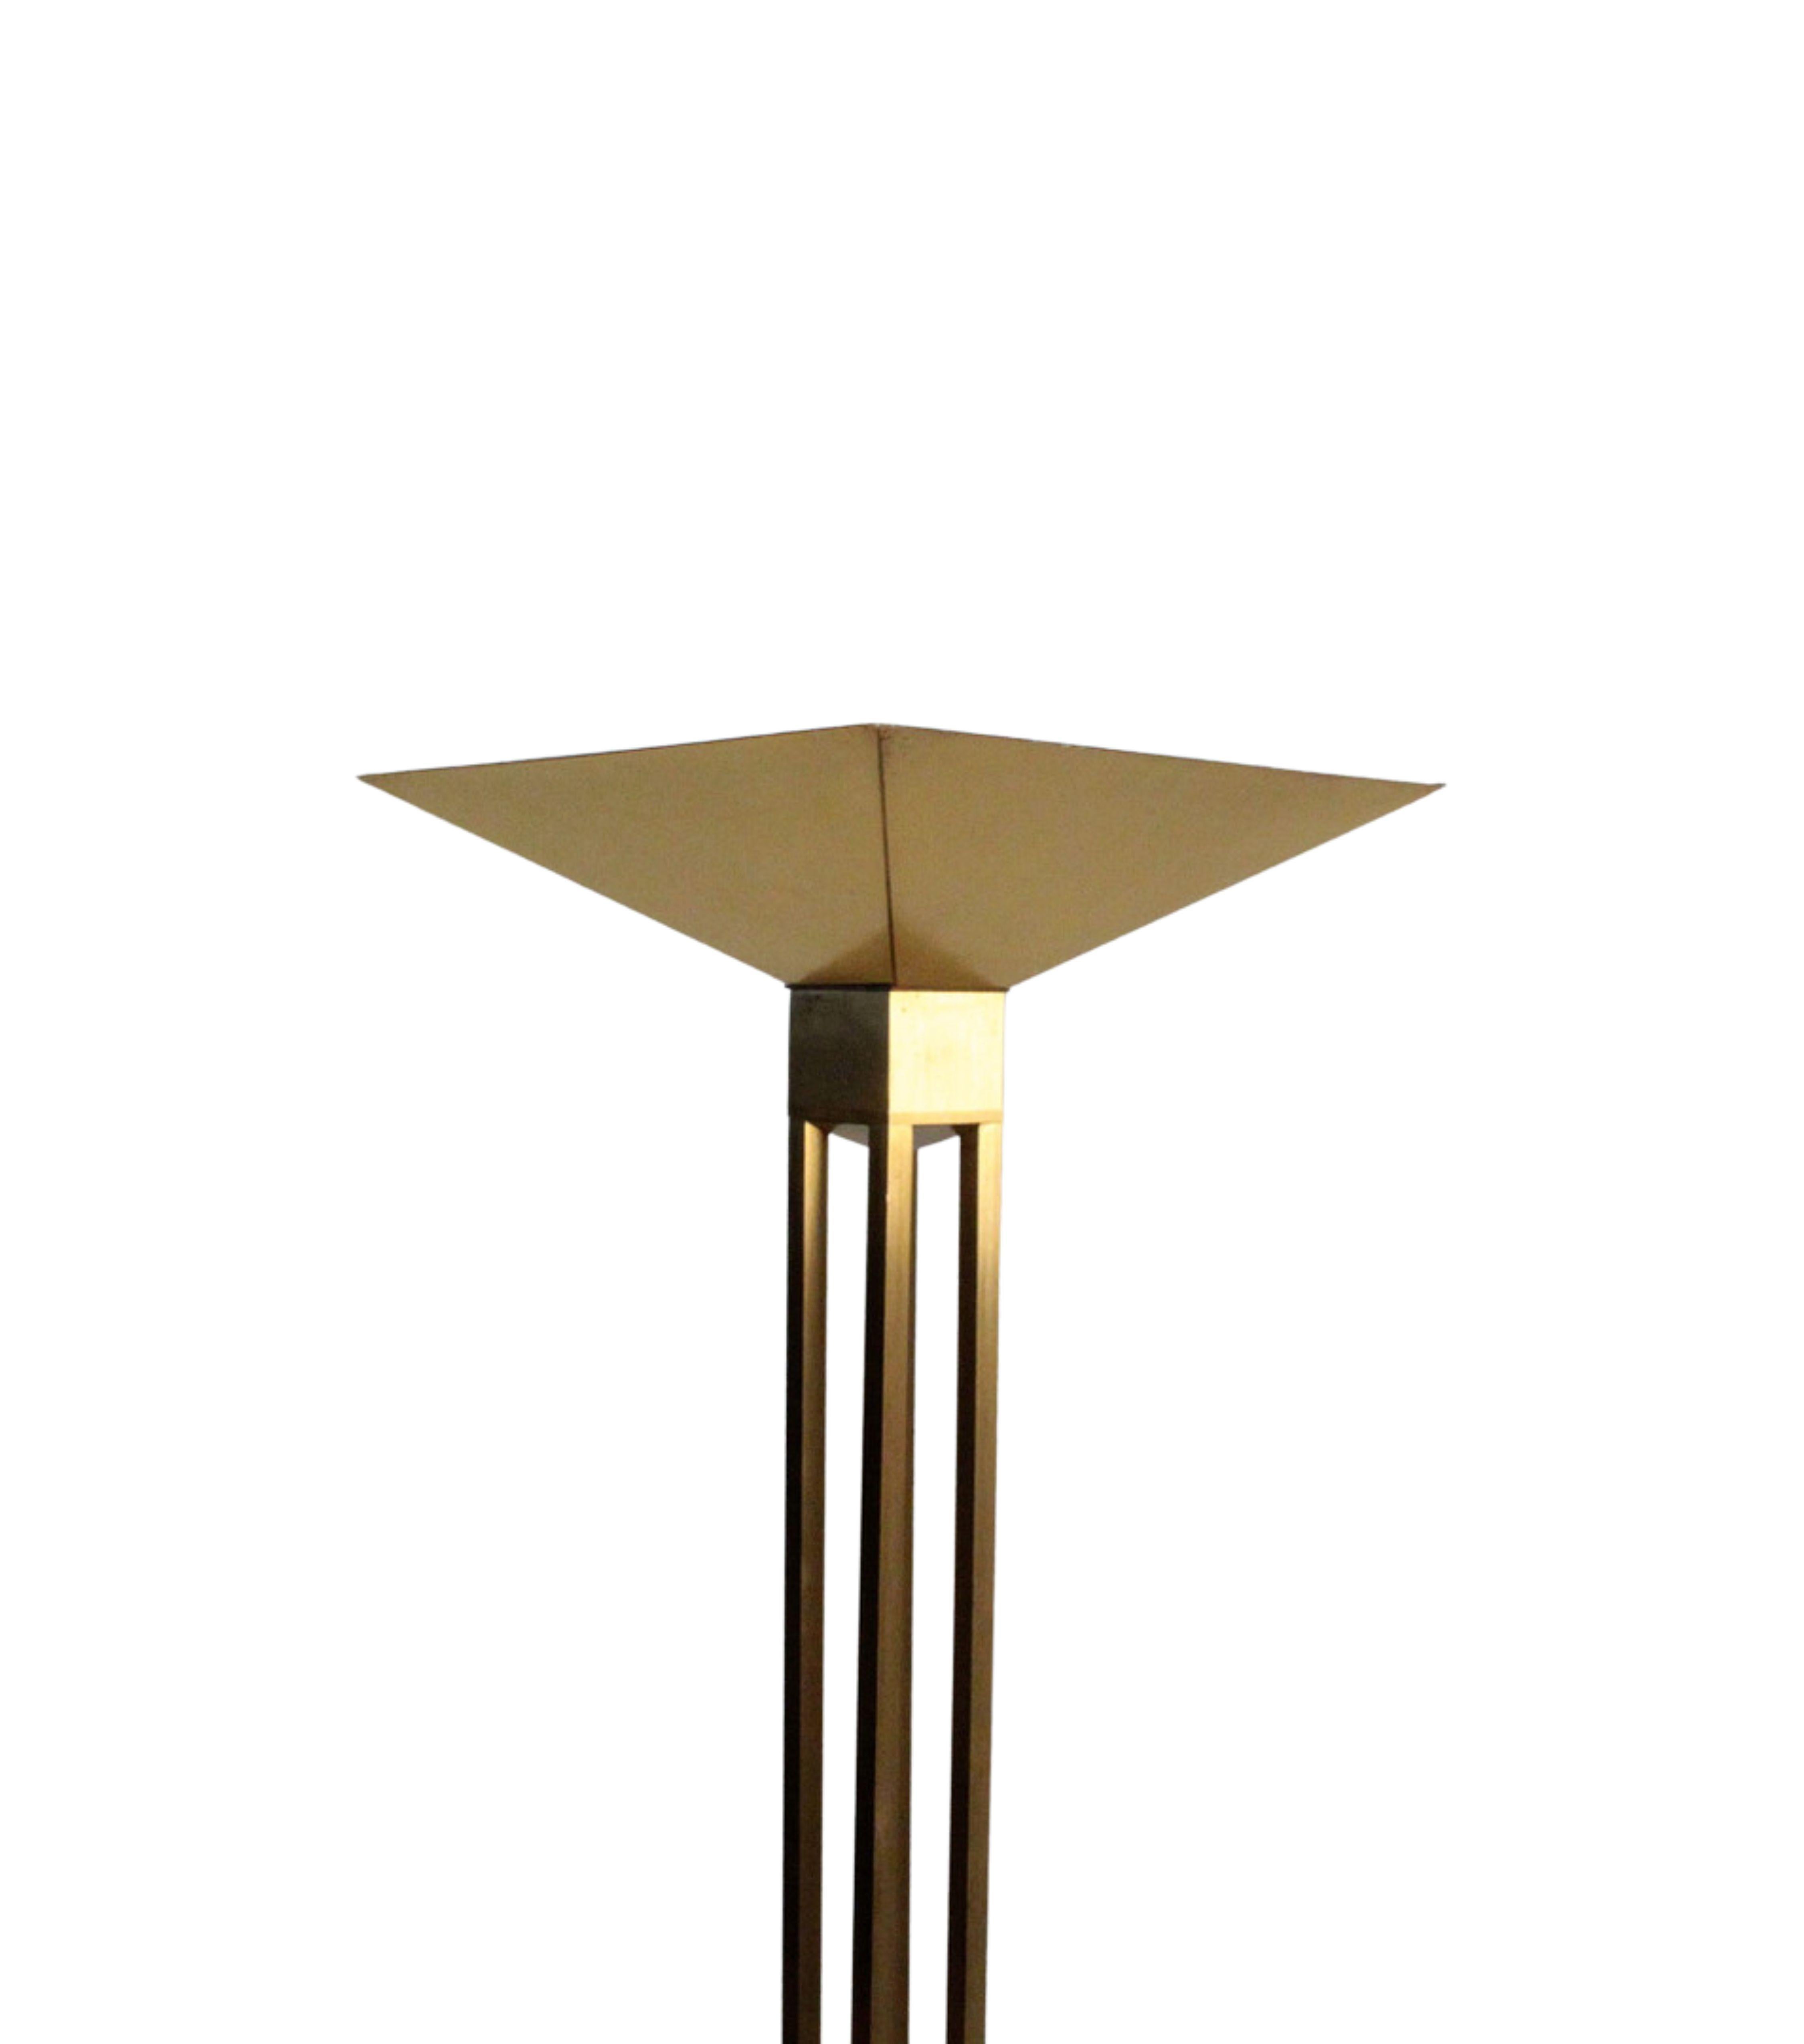 This Italian-made floor lamp is a stunning example of 1970s design, crafted from high-quality brass. Its sleek and minimalist design features an uplighter that provides a soft and diffused glow, creating a warm and inviting atmosphere in any room.